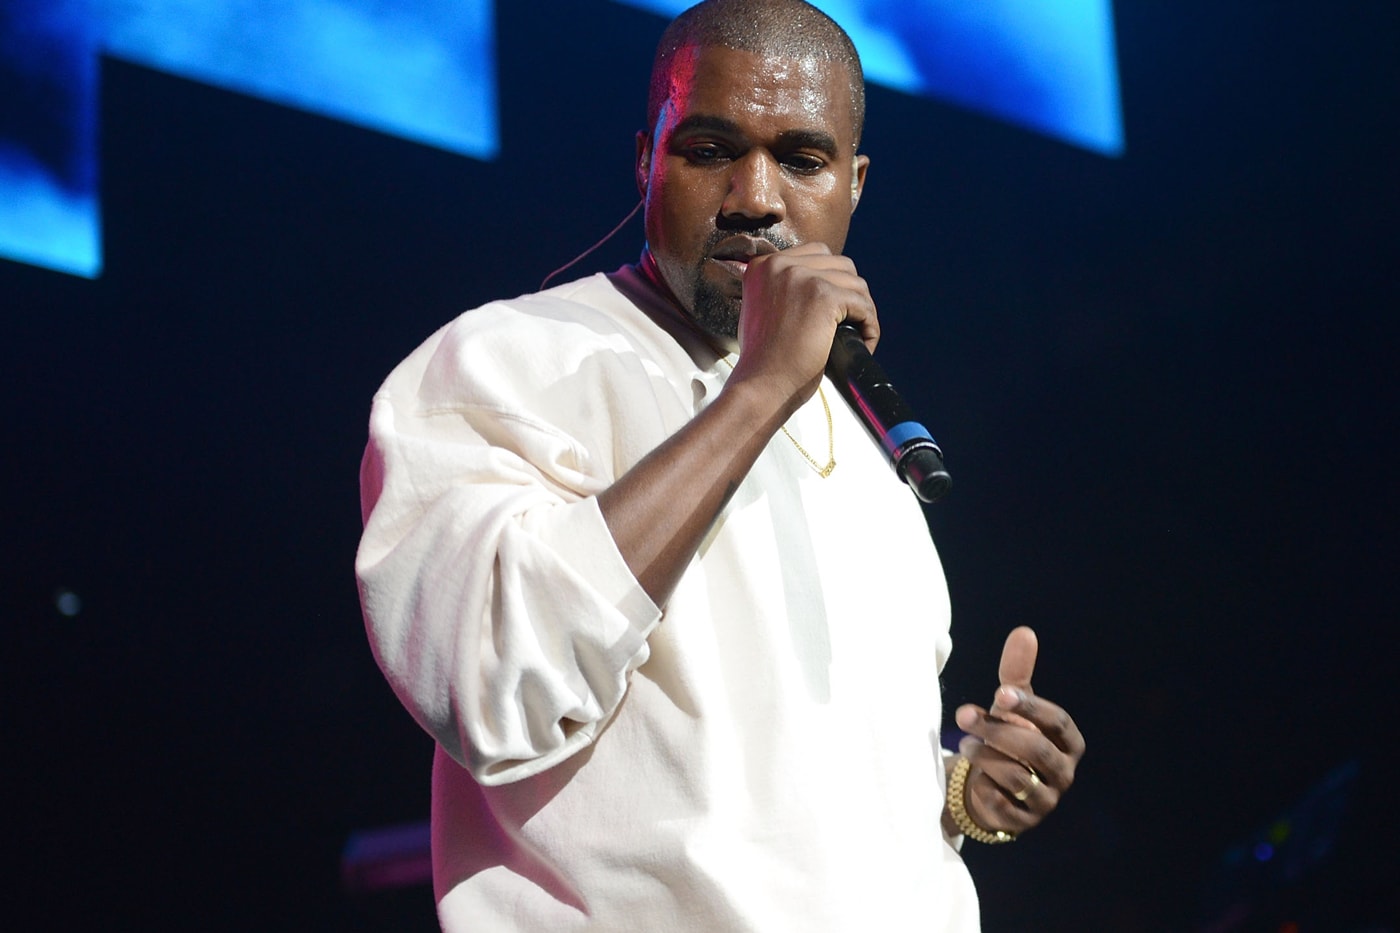 Kanye West's New Album 'The Life of Pablo" is Being Illegally Downloaded